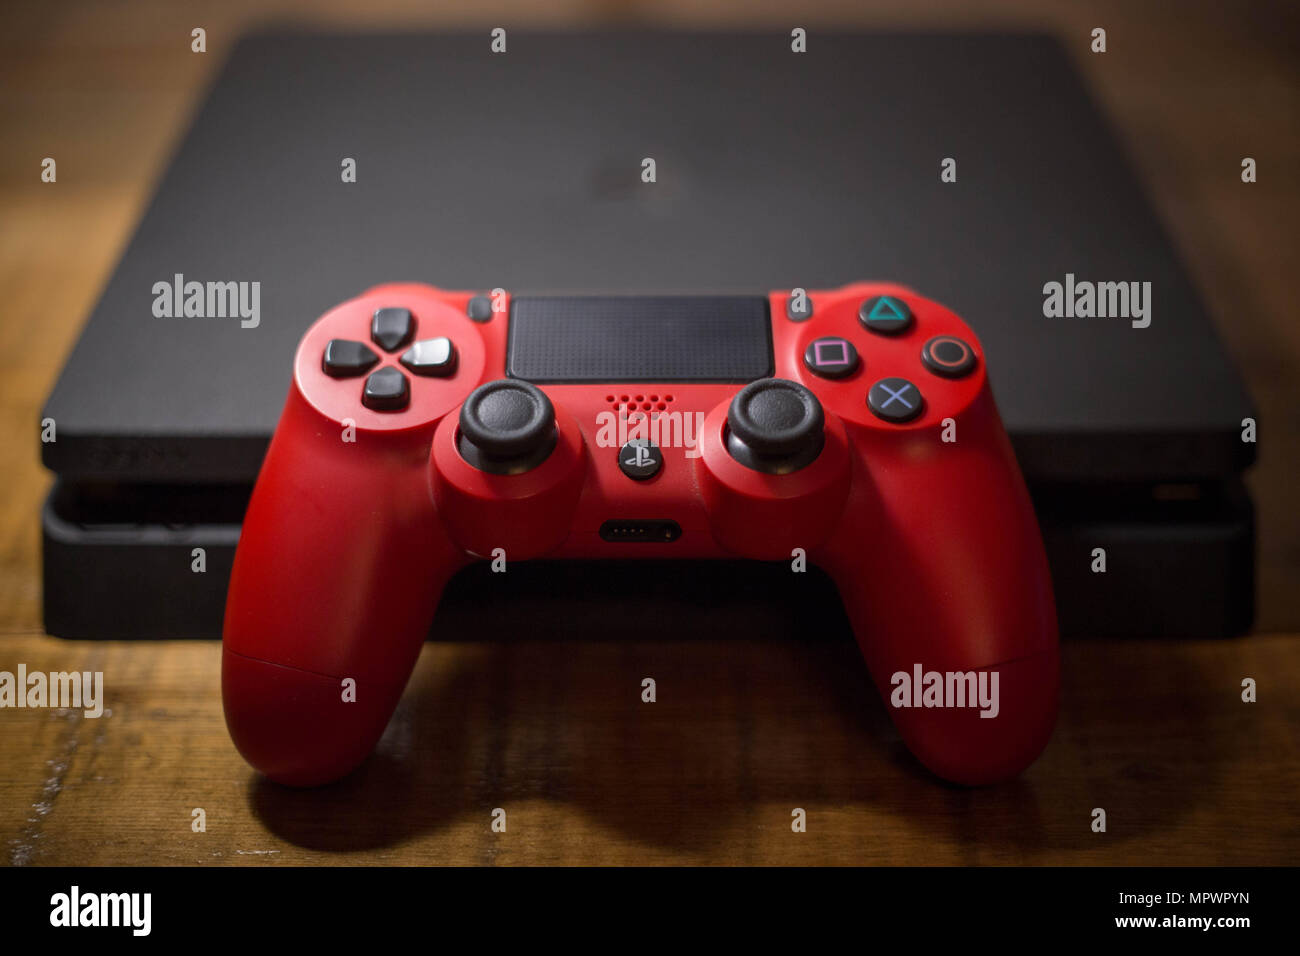 Ps4 Games High Resolution Stock Photography and Images - Alamy